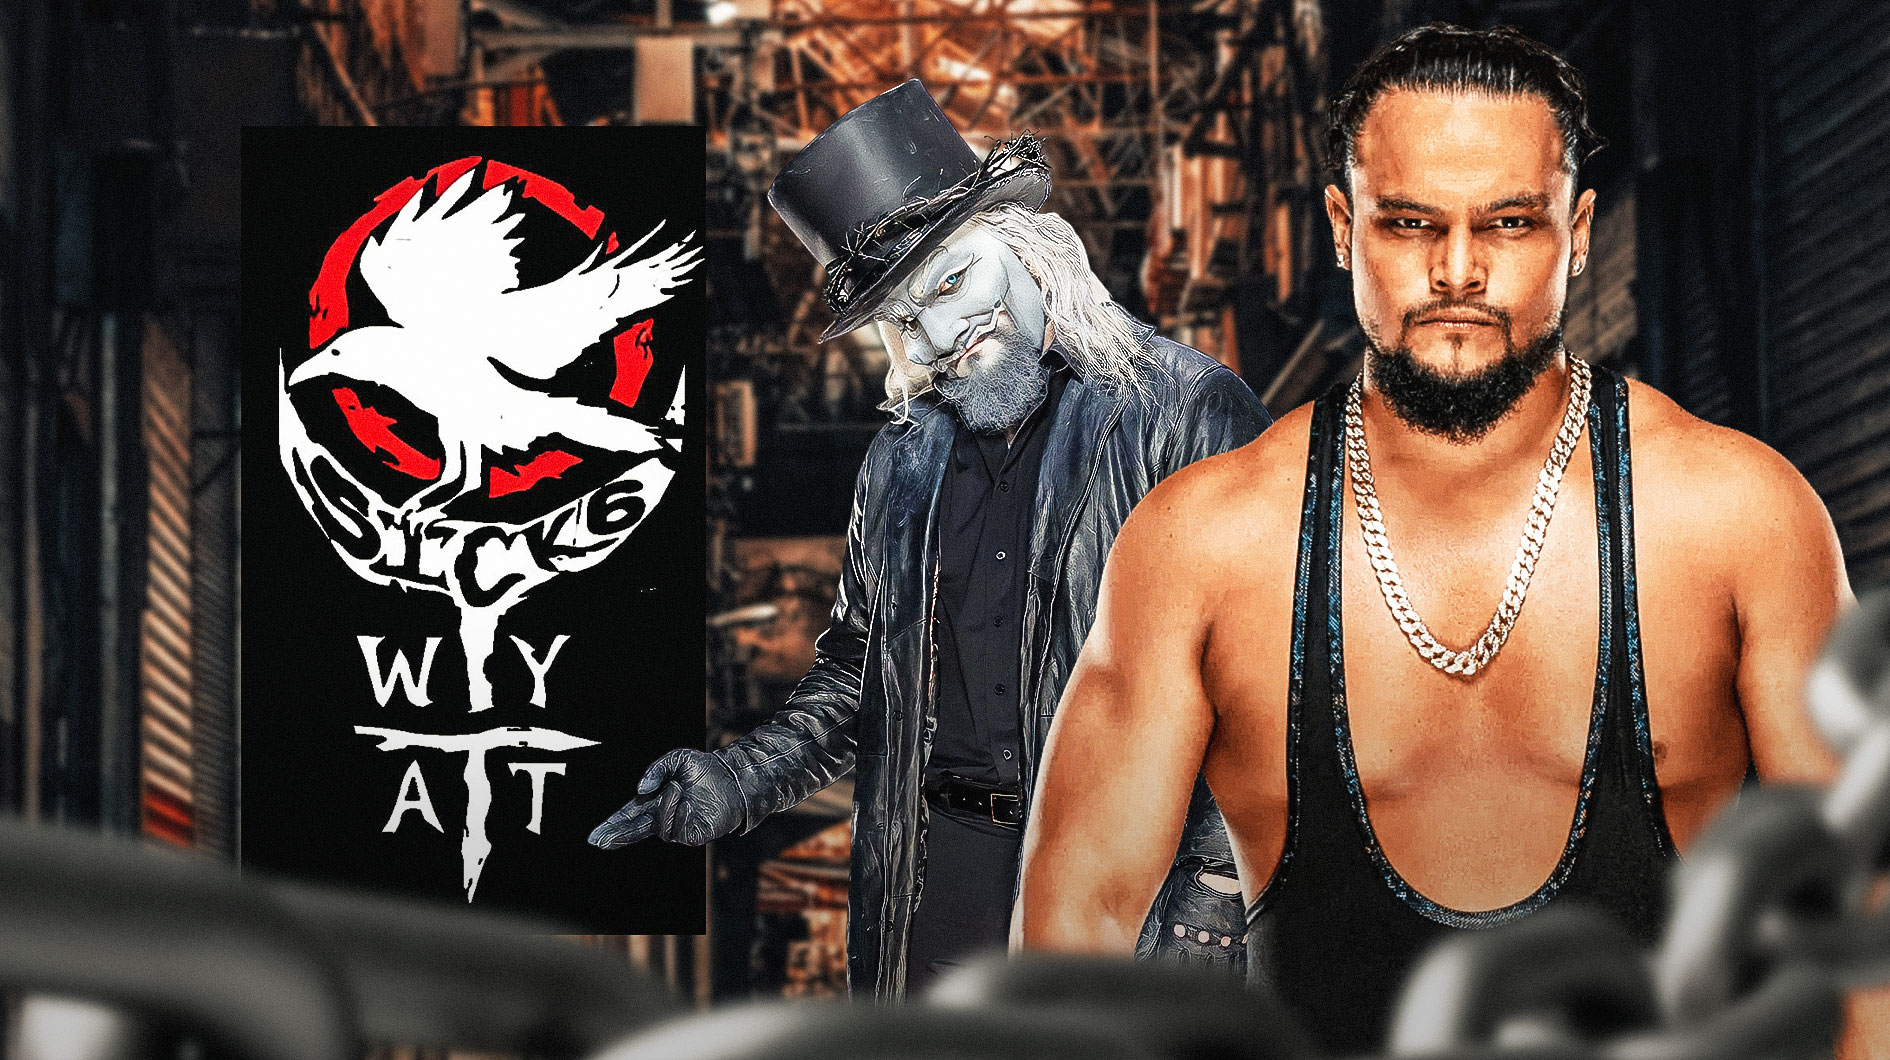 Read more about the article Why is WWE trying to make Uncle Howdy sympathetic with the shocking VHS reveal of Wyatt Sick6?